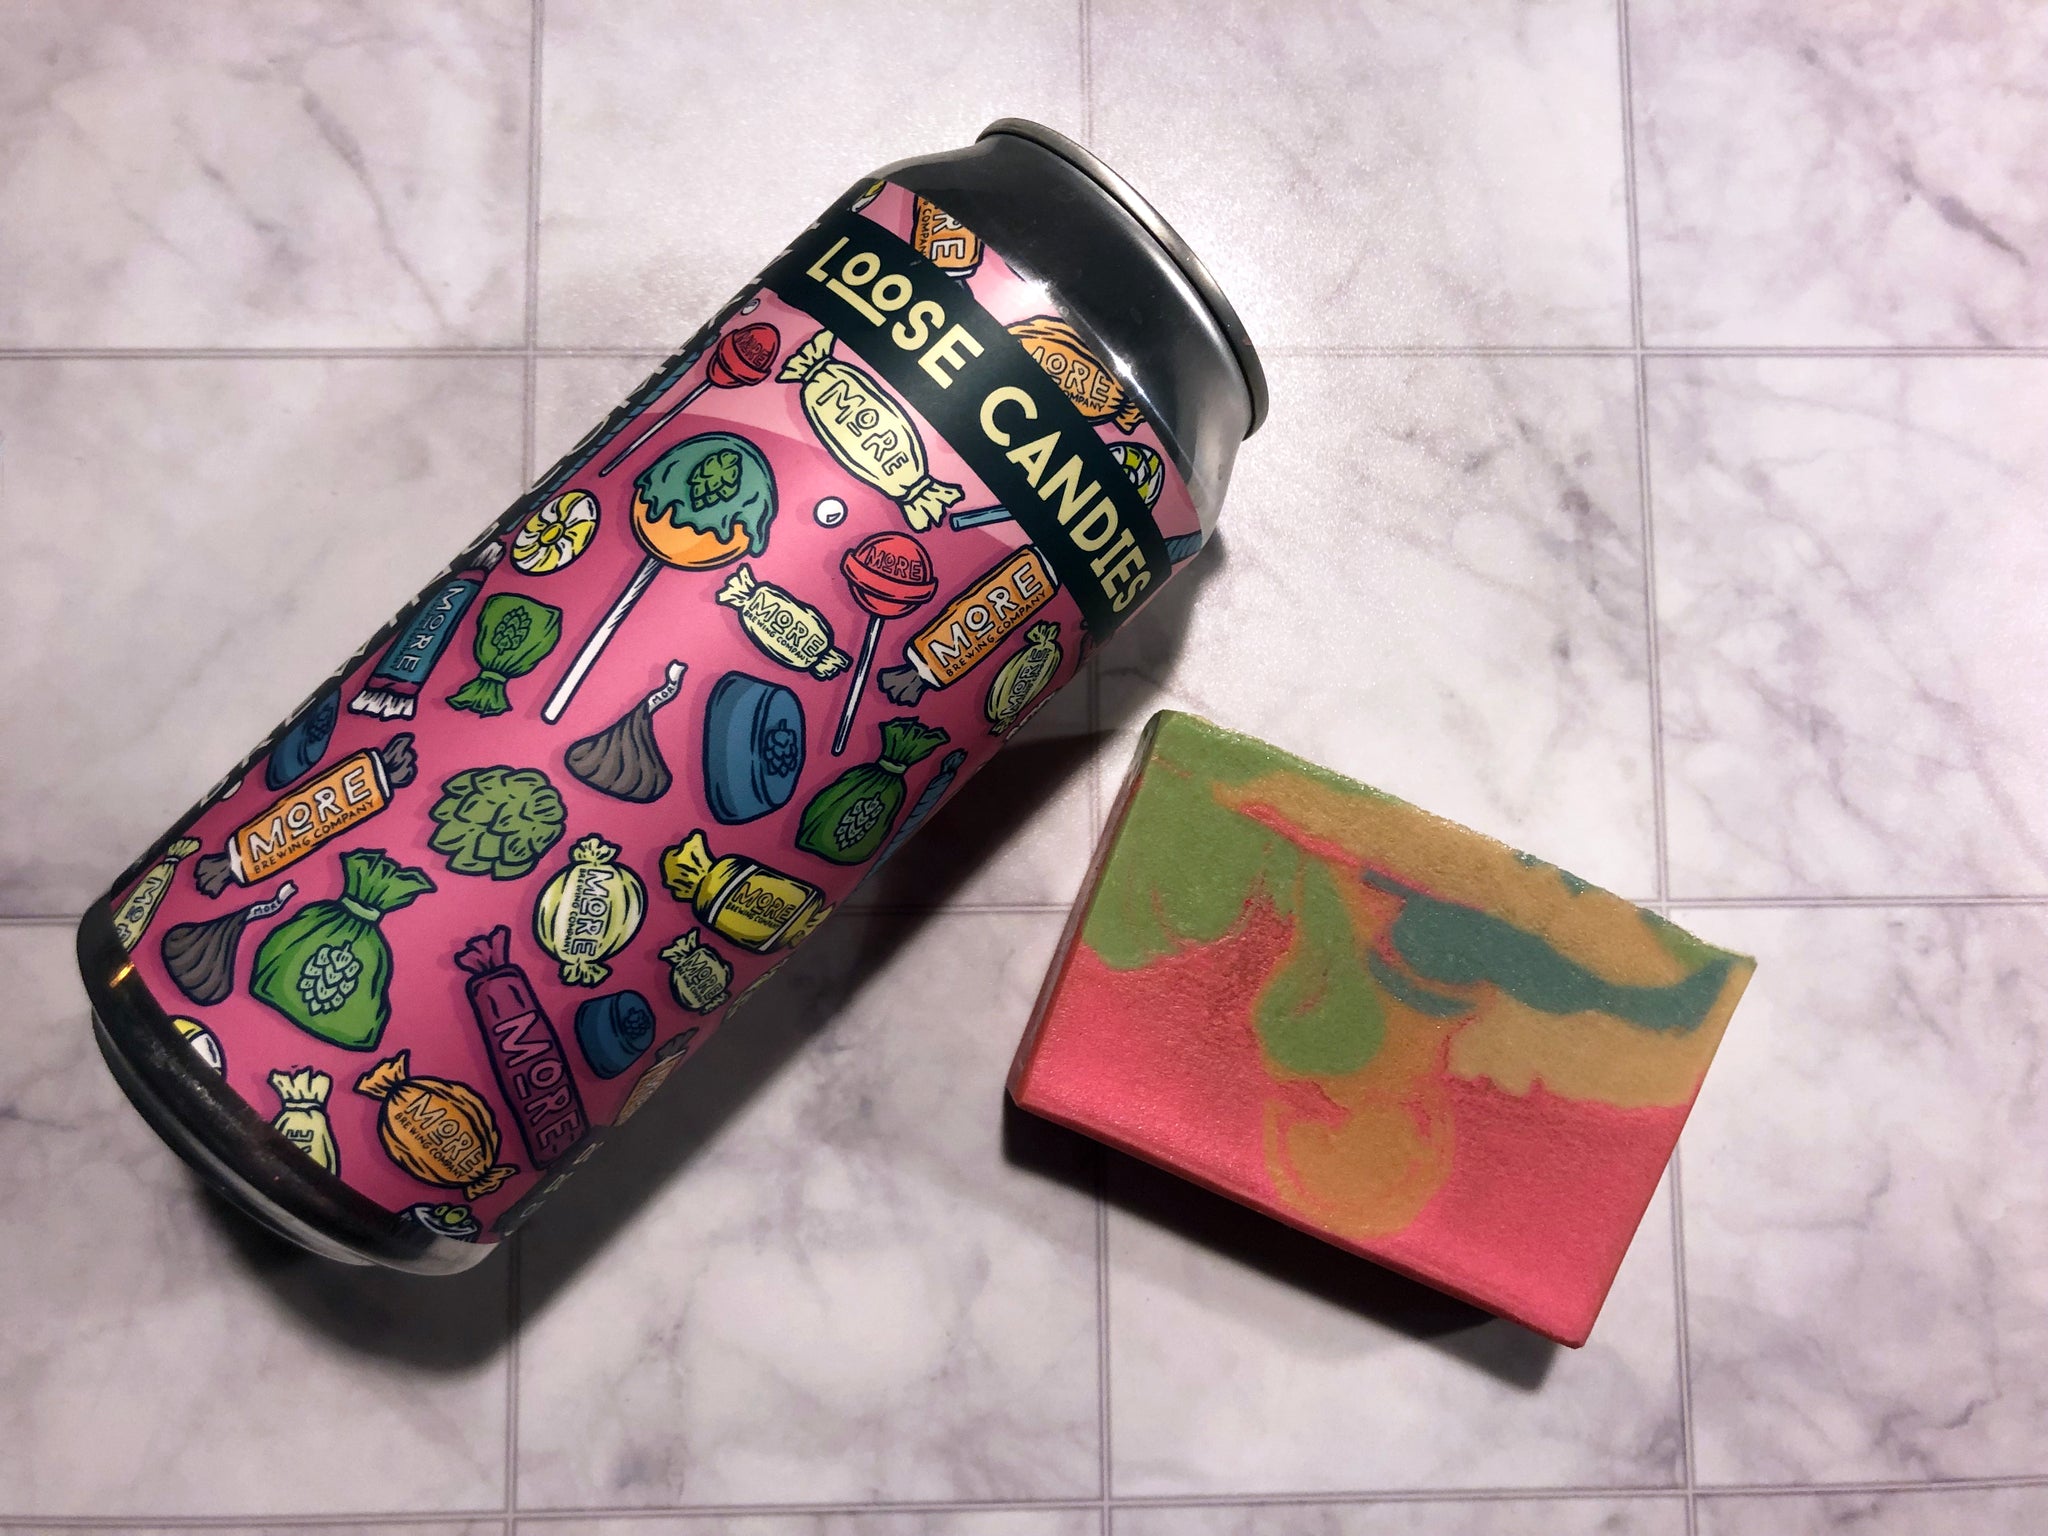 pink green yellow blue and orange beer soap handmade with loose candies ddh dipa from more brewing company villa park Illinois brewery candy beer soap by spunkndisorderly craft beer soaps loose candies double dry hopped double ipa beer soap